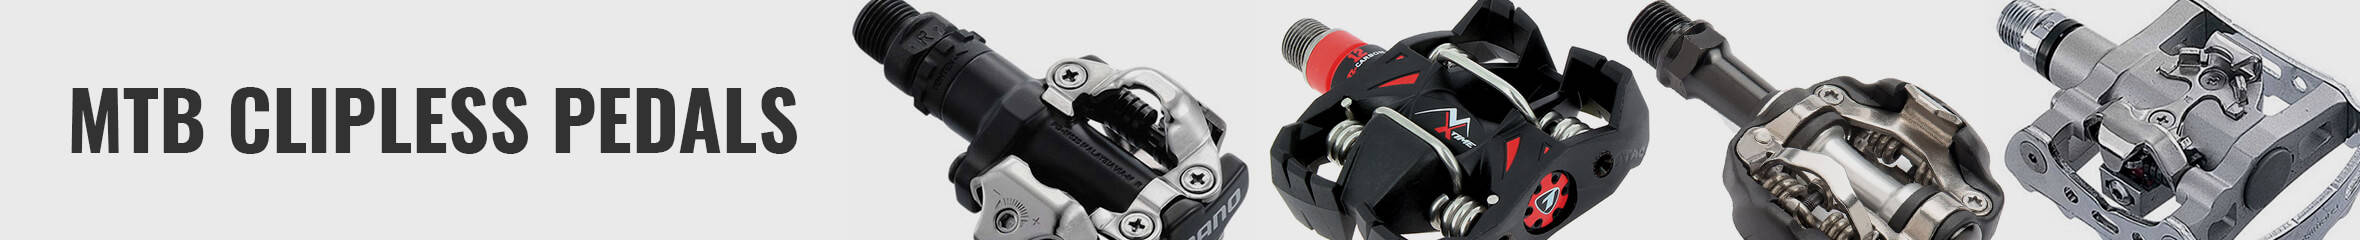 MTB Clipless Pedals